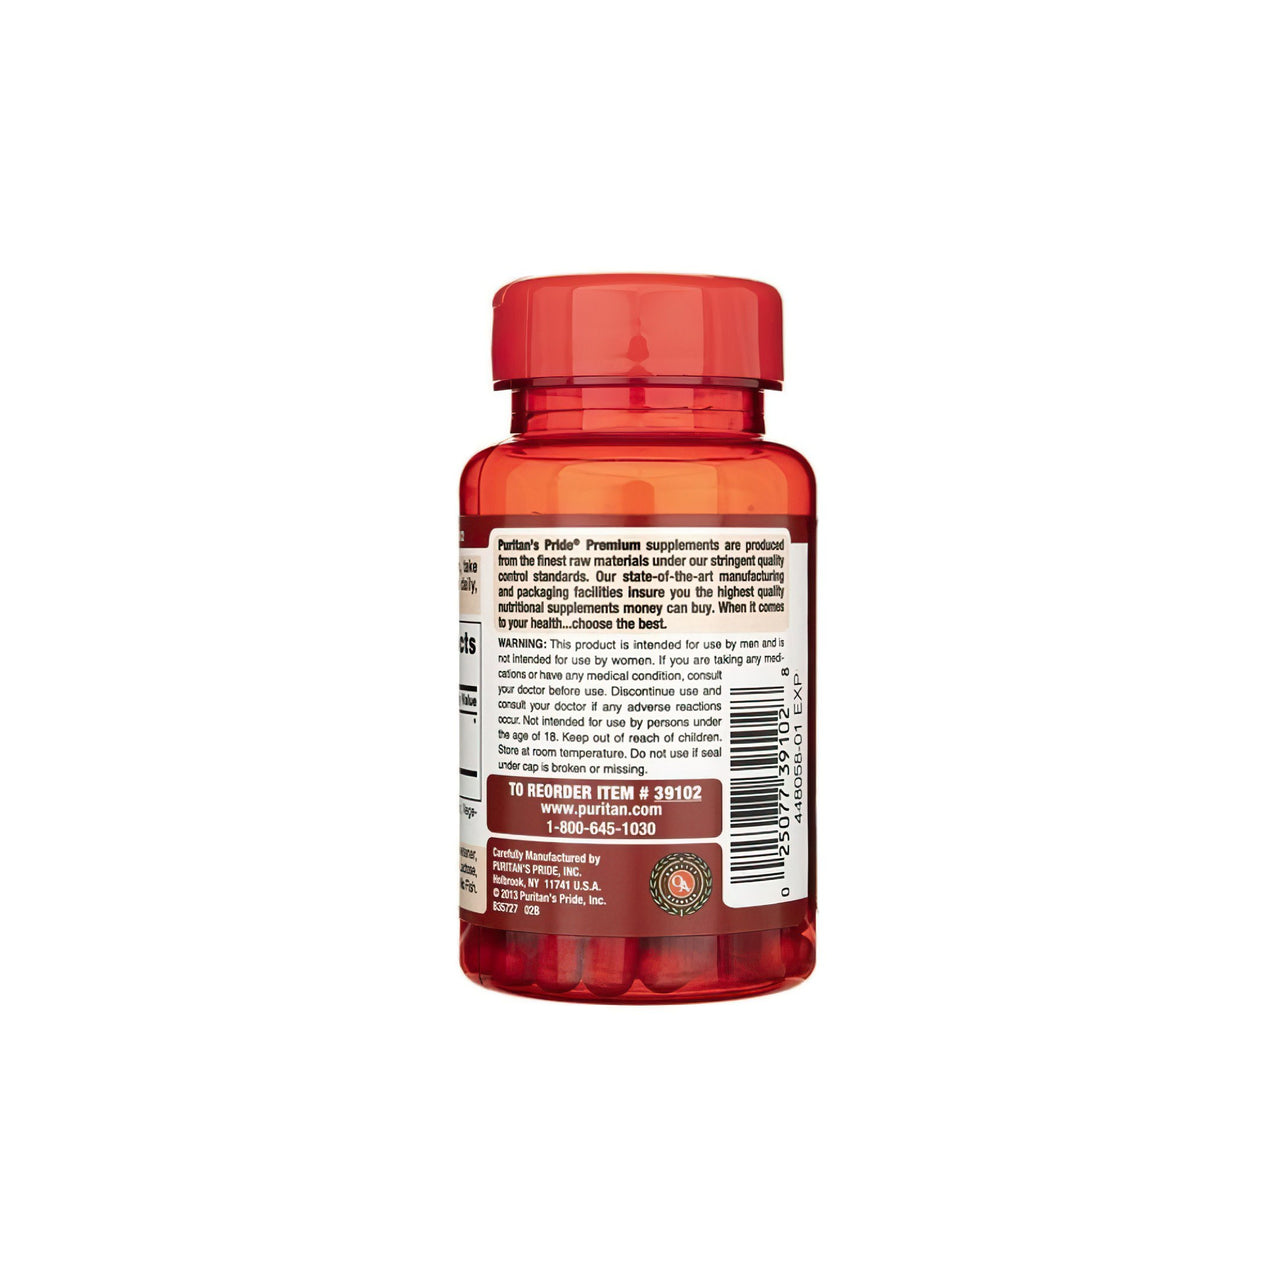 A bottle of Puritan's Pride Maca 500 mg 60 Rapid Release Capsules on a white background.